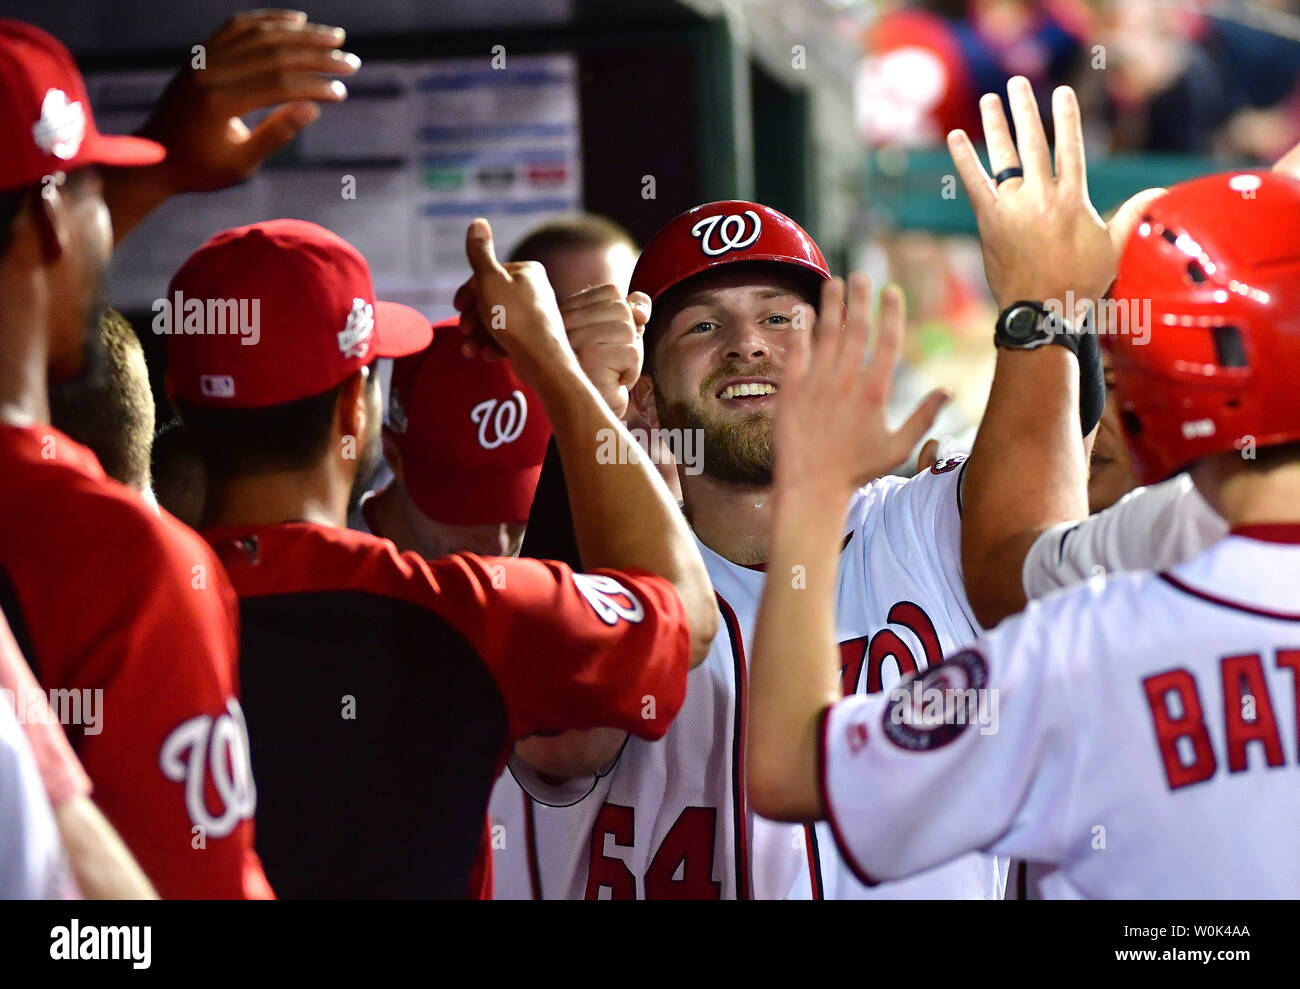 Washington Nationals catcher Spencer Kieboom celebrates in the dugout after scoring off of a single from Trea Turner against the Miami Marlins in the seventh inning at Nationals Park in Washington, D.C. on July 5, 2018. The Washington Nationals defeated the Miami Marlins 14-12. Photo by Kevin Dietsch/UPI Stock Photo